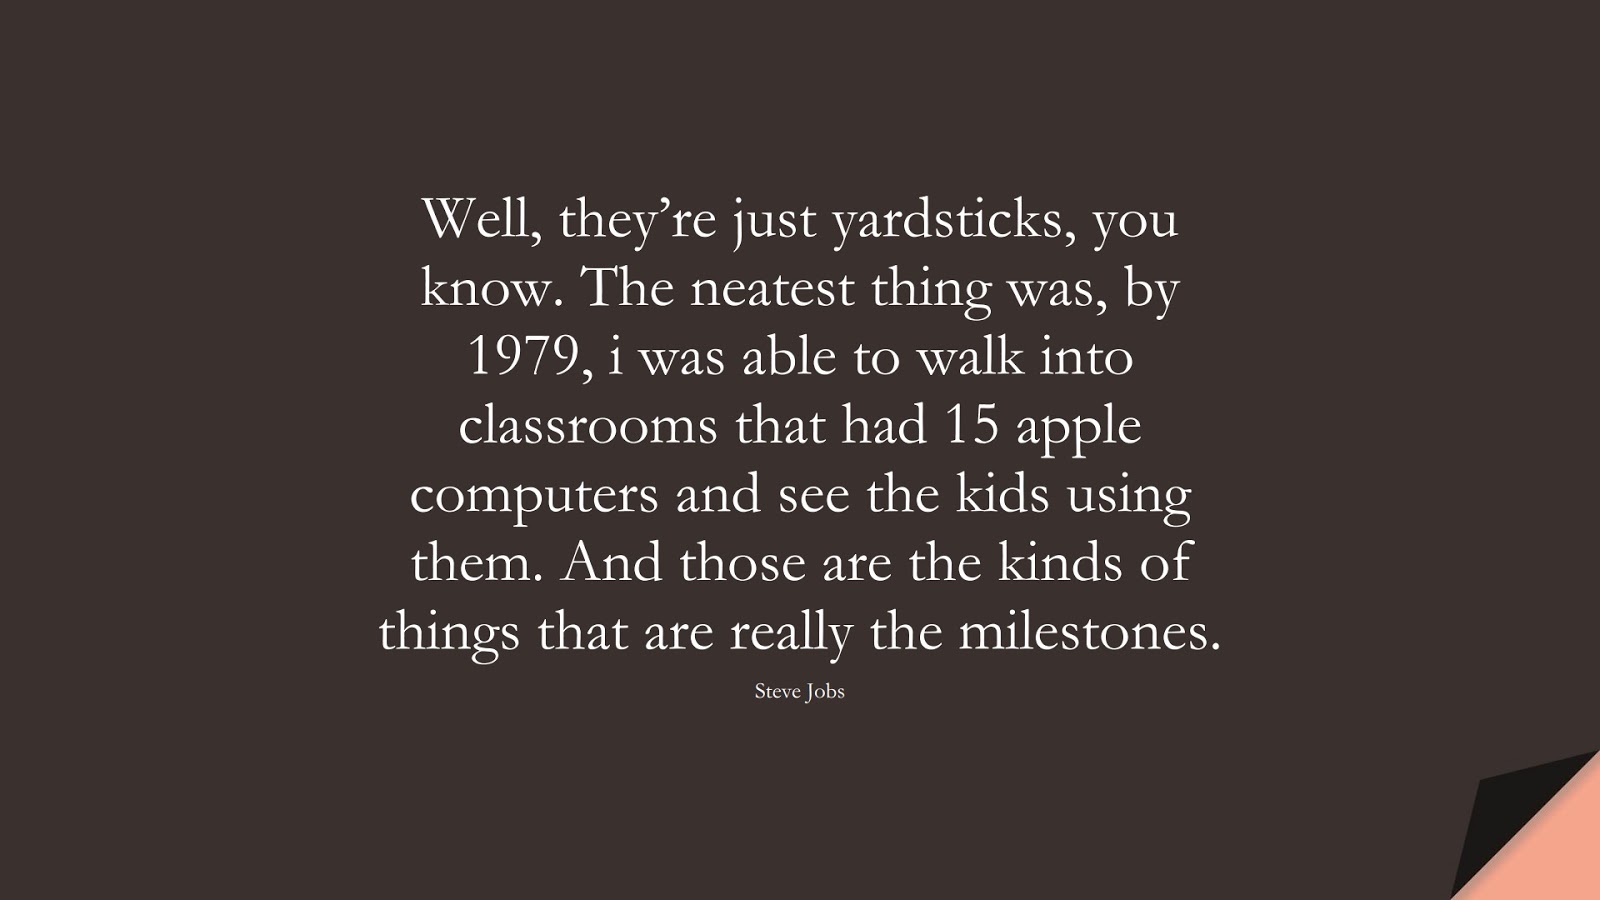 Well, they’re just yardsticks, you know. The neatest thing was, by 1979, i was able to walk into classrooms that had 15 apple computers and see the kids using them. And those are the kinds of things that are really the milestones. (Steve Jobs);  #SteveJobsQuotes